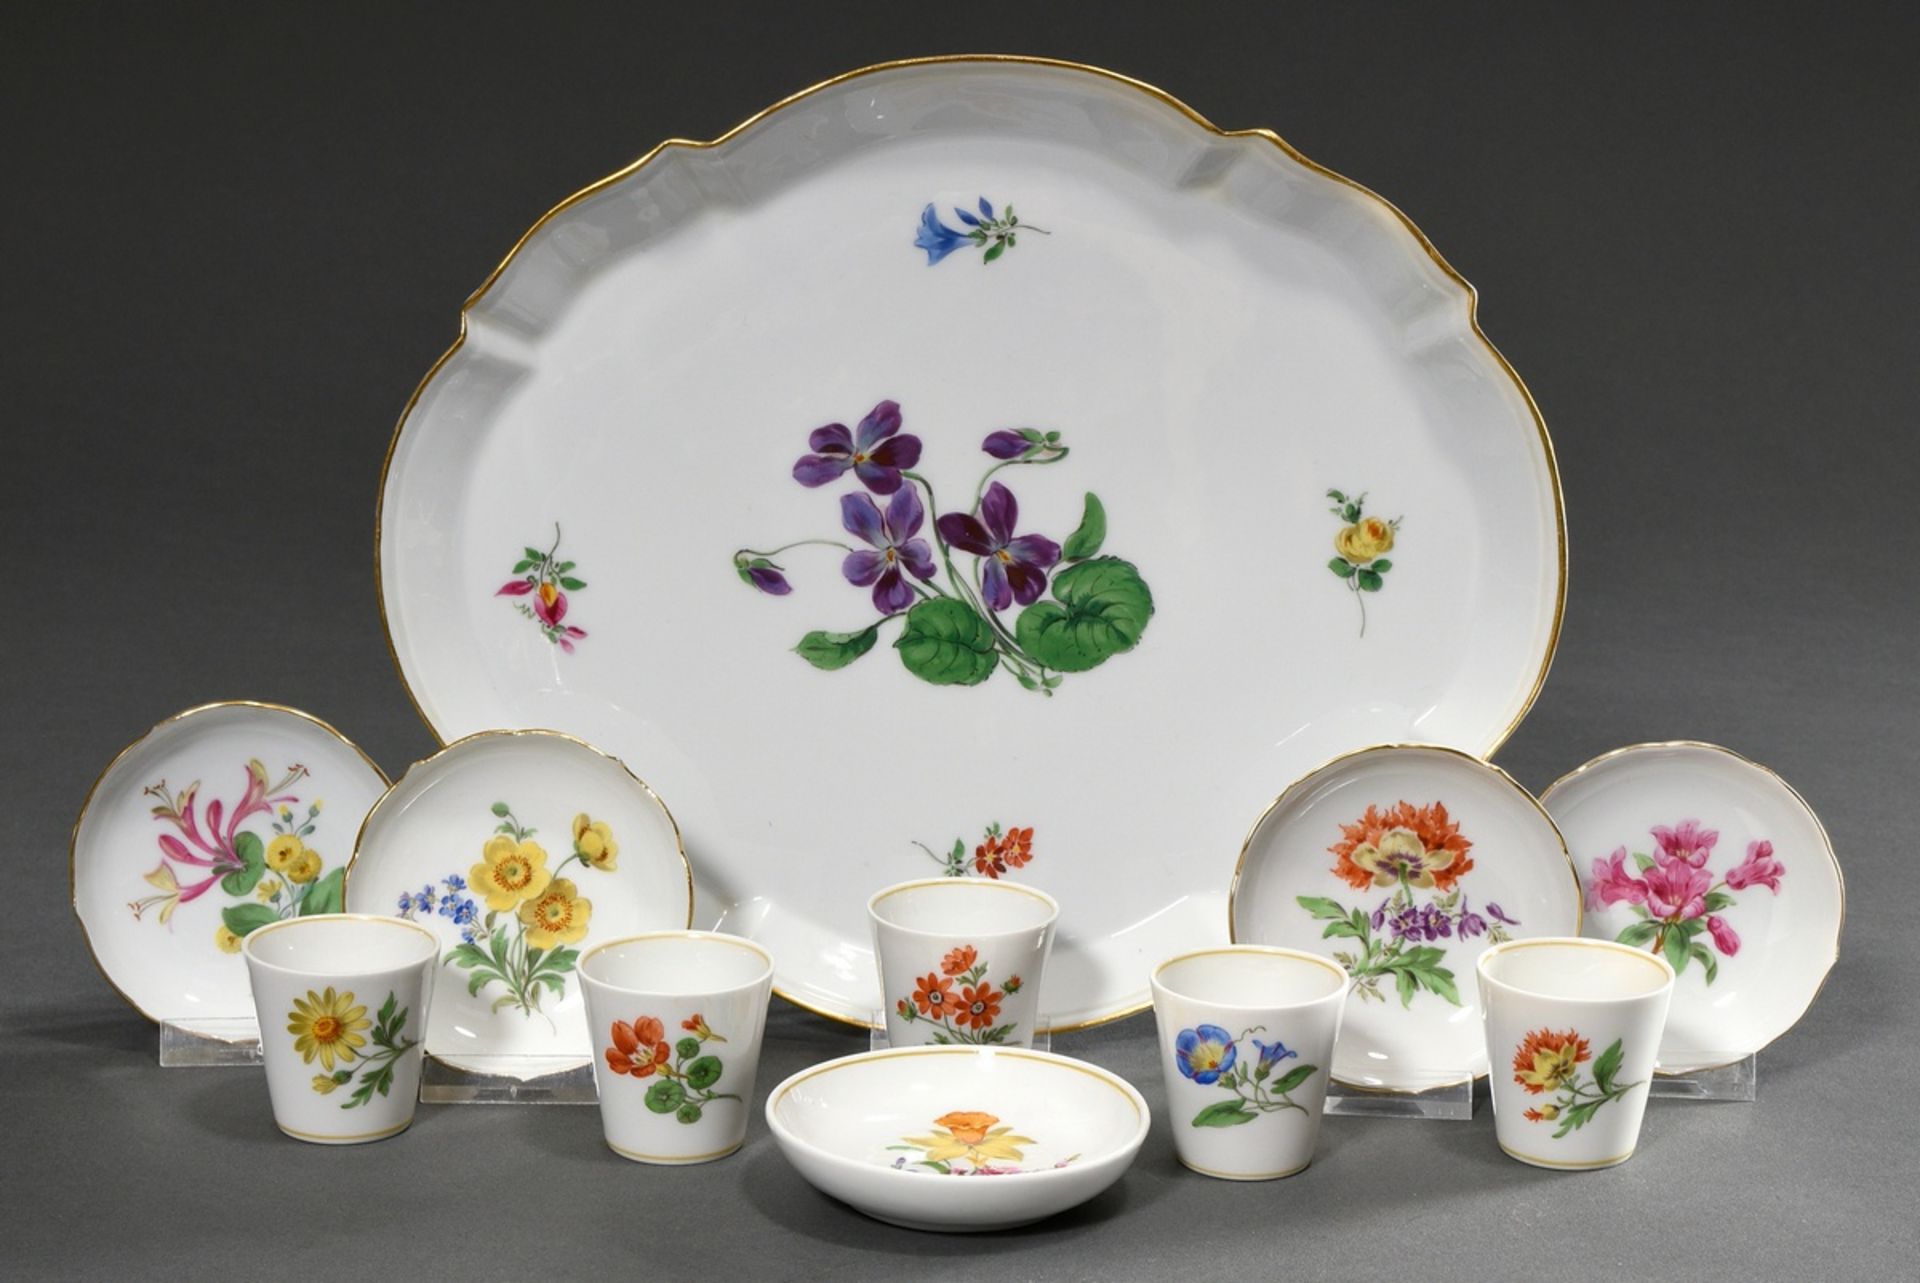 11 Various pieces Meissen "German Flower" with gold staffage and yellow rim (war painting), 1924-19